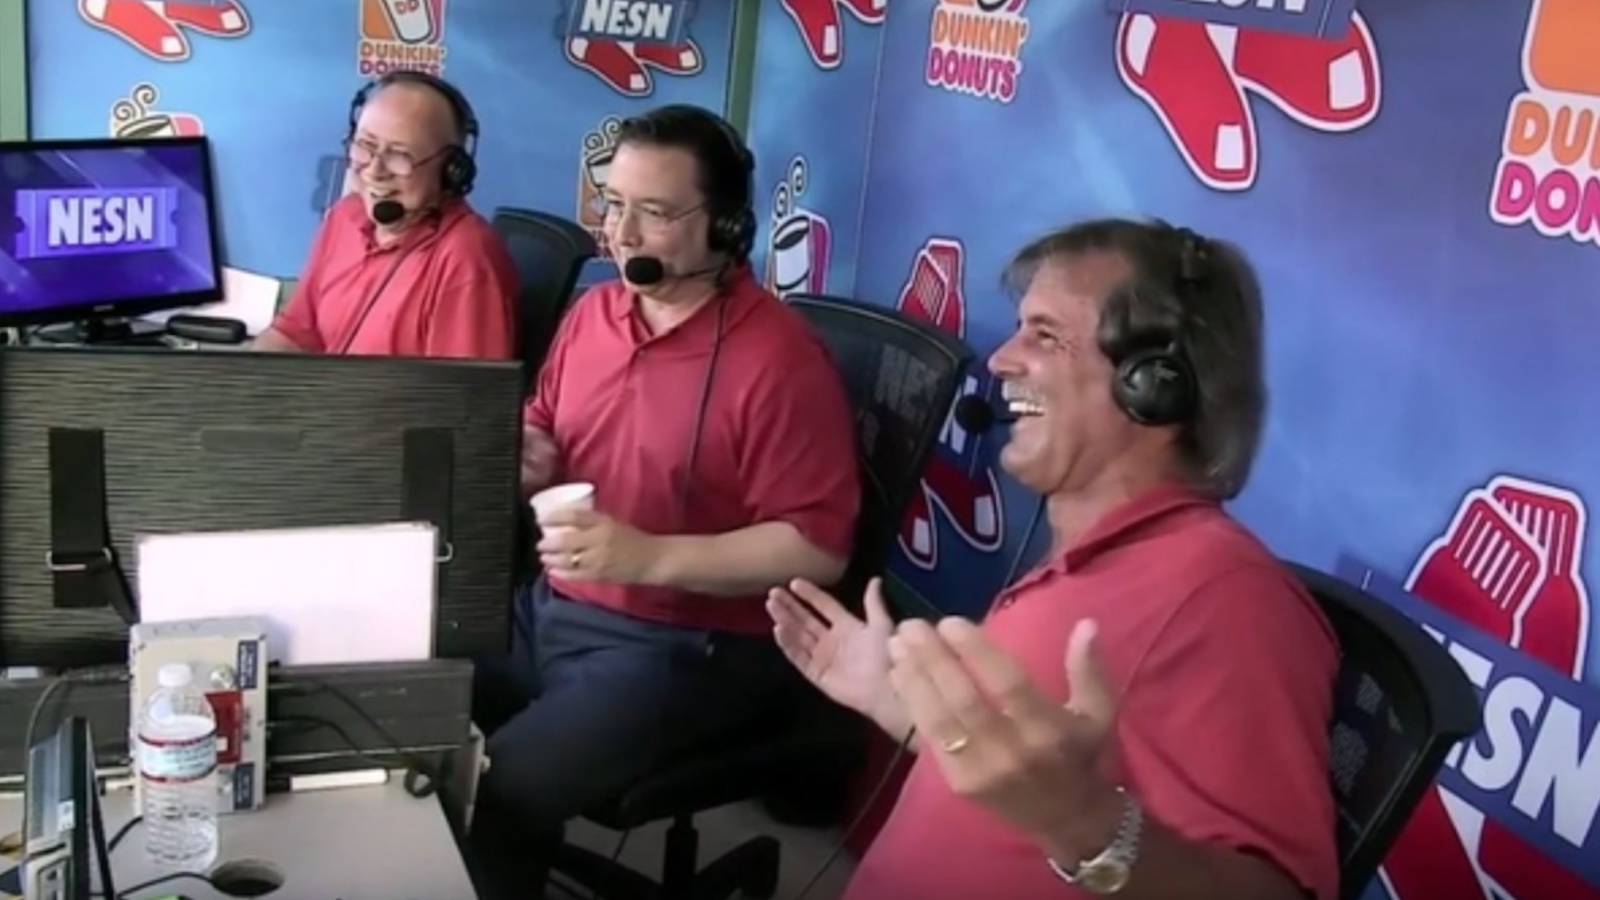 Dennis Eckersley to retire from NESN after 20 years